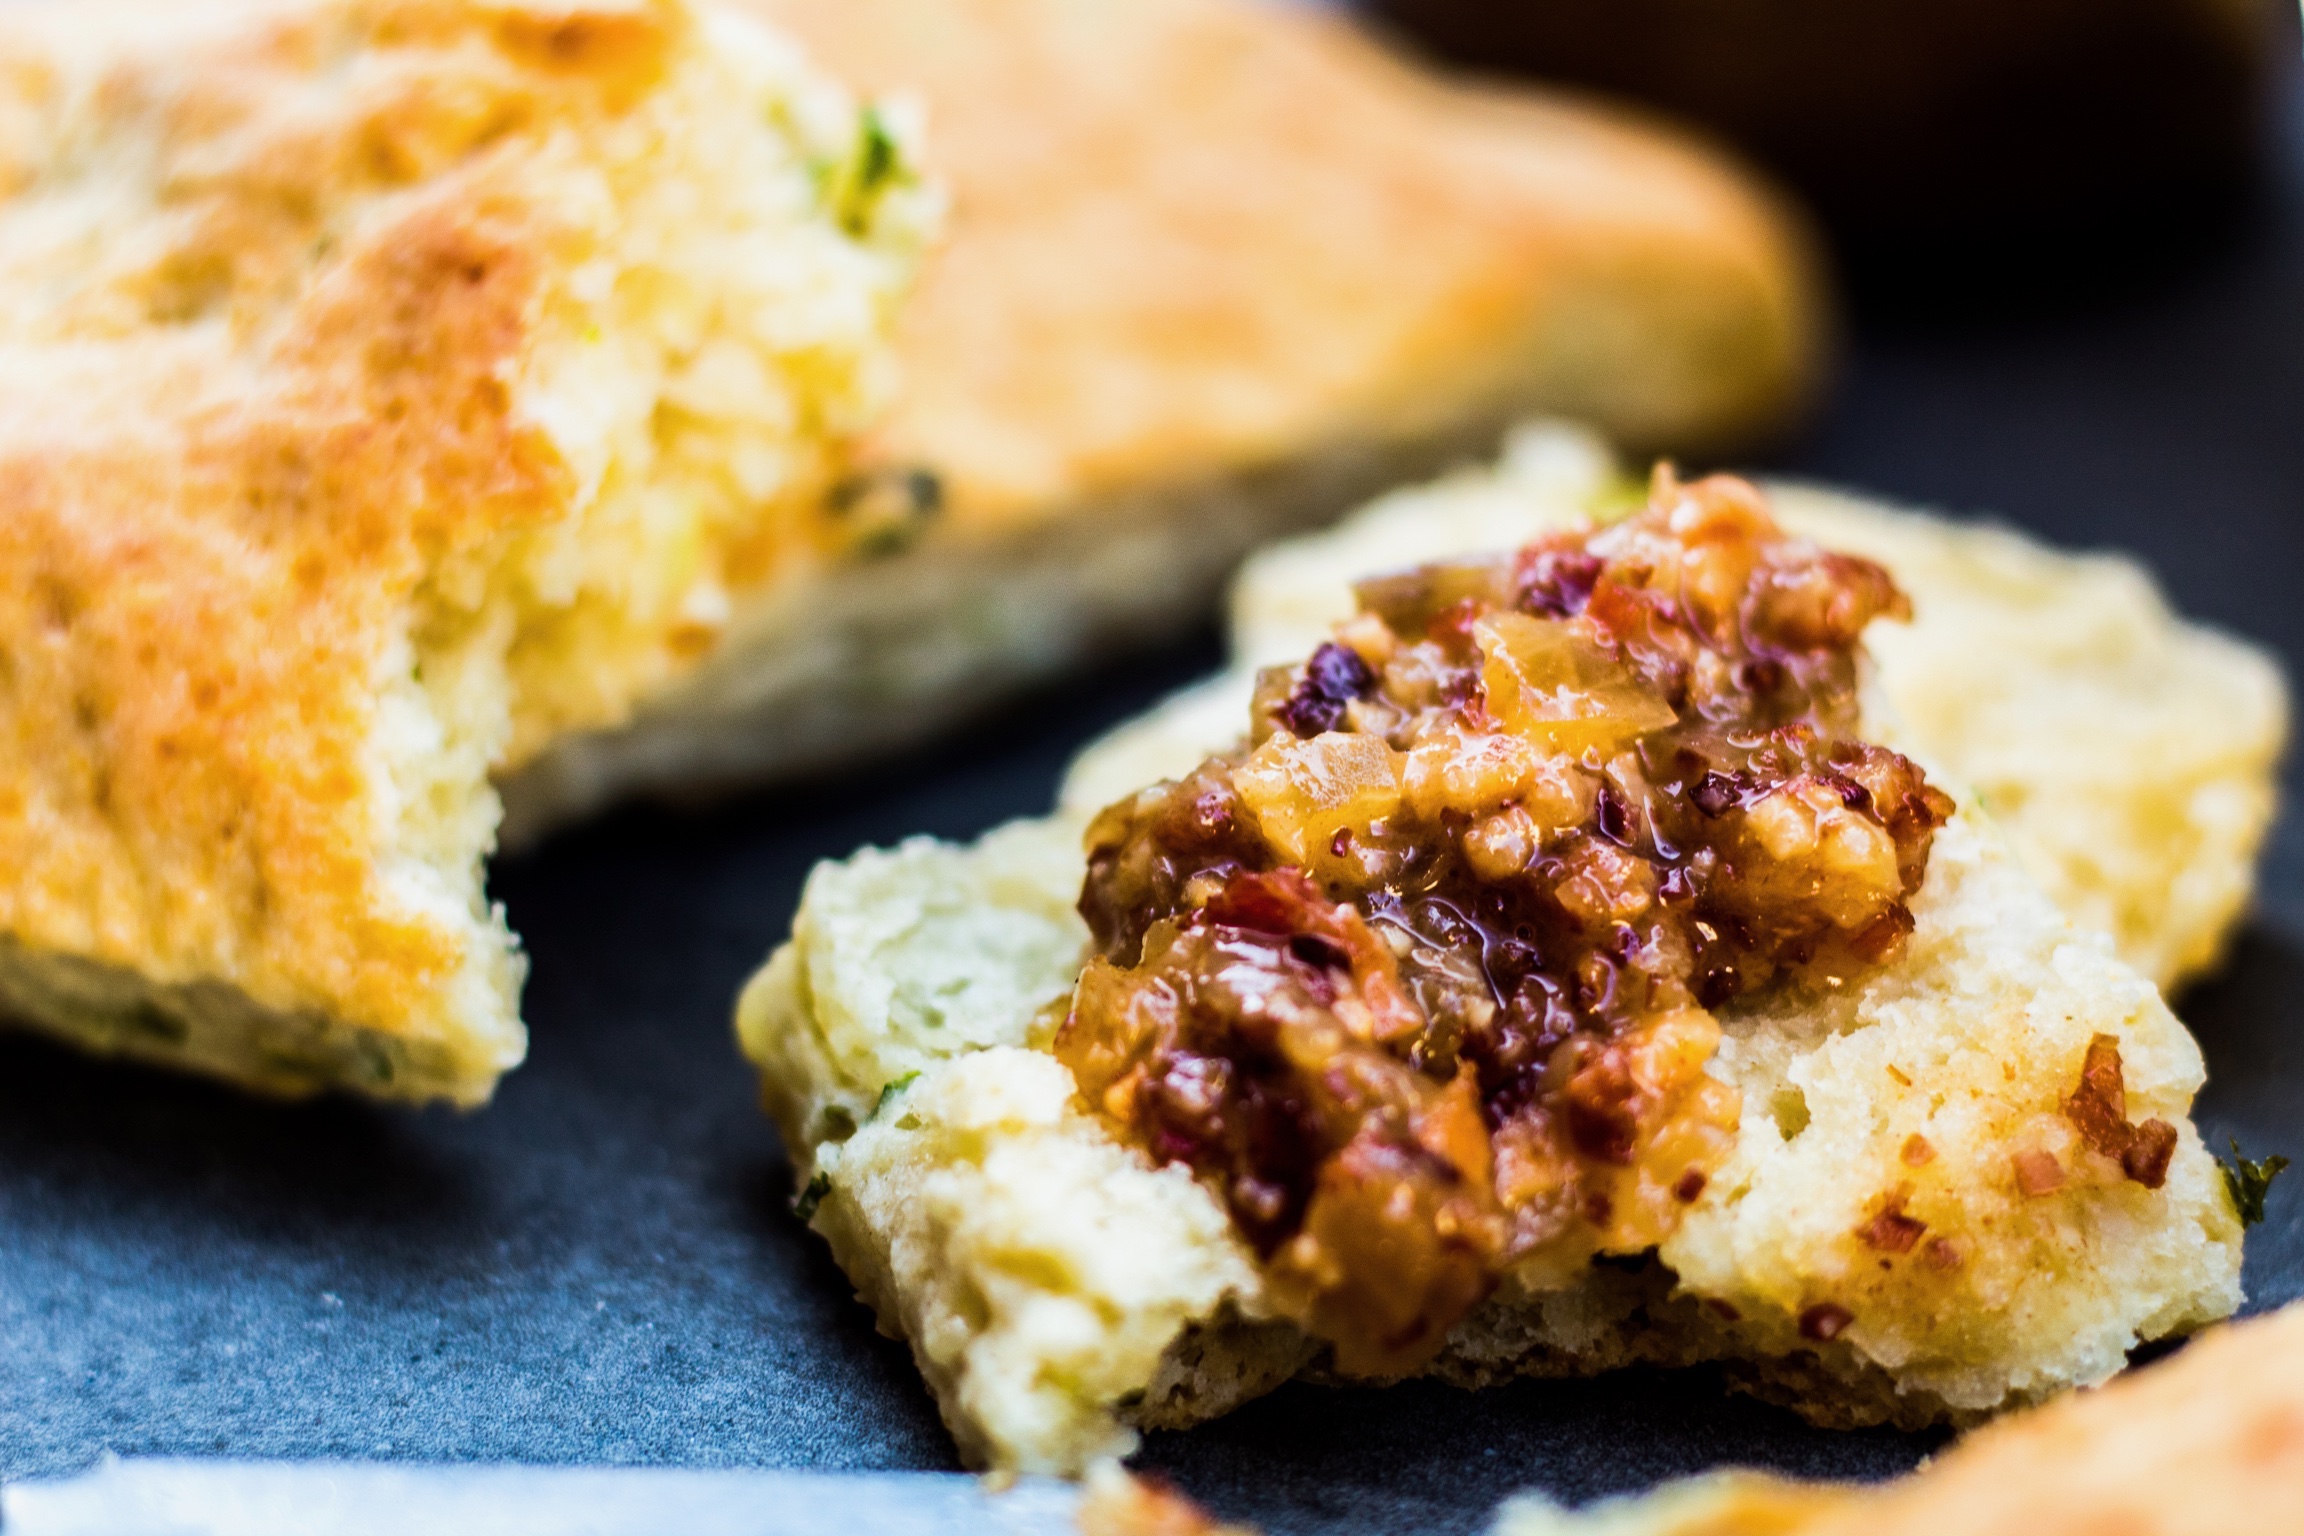 Chive biscuits and bacon butter